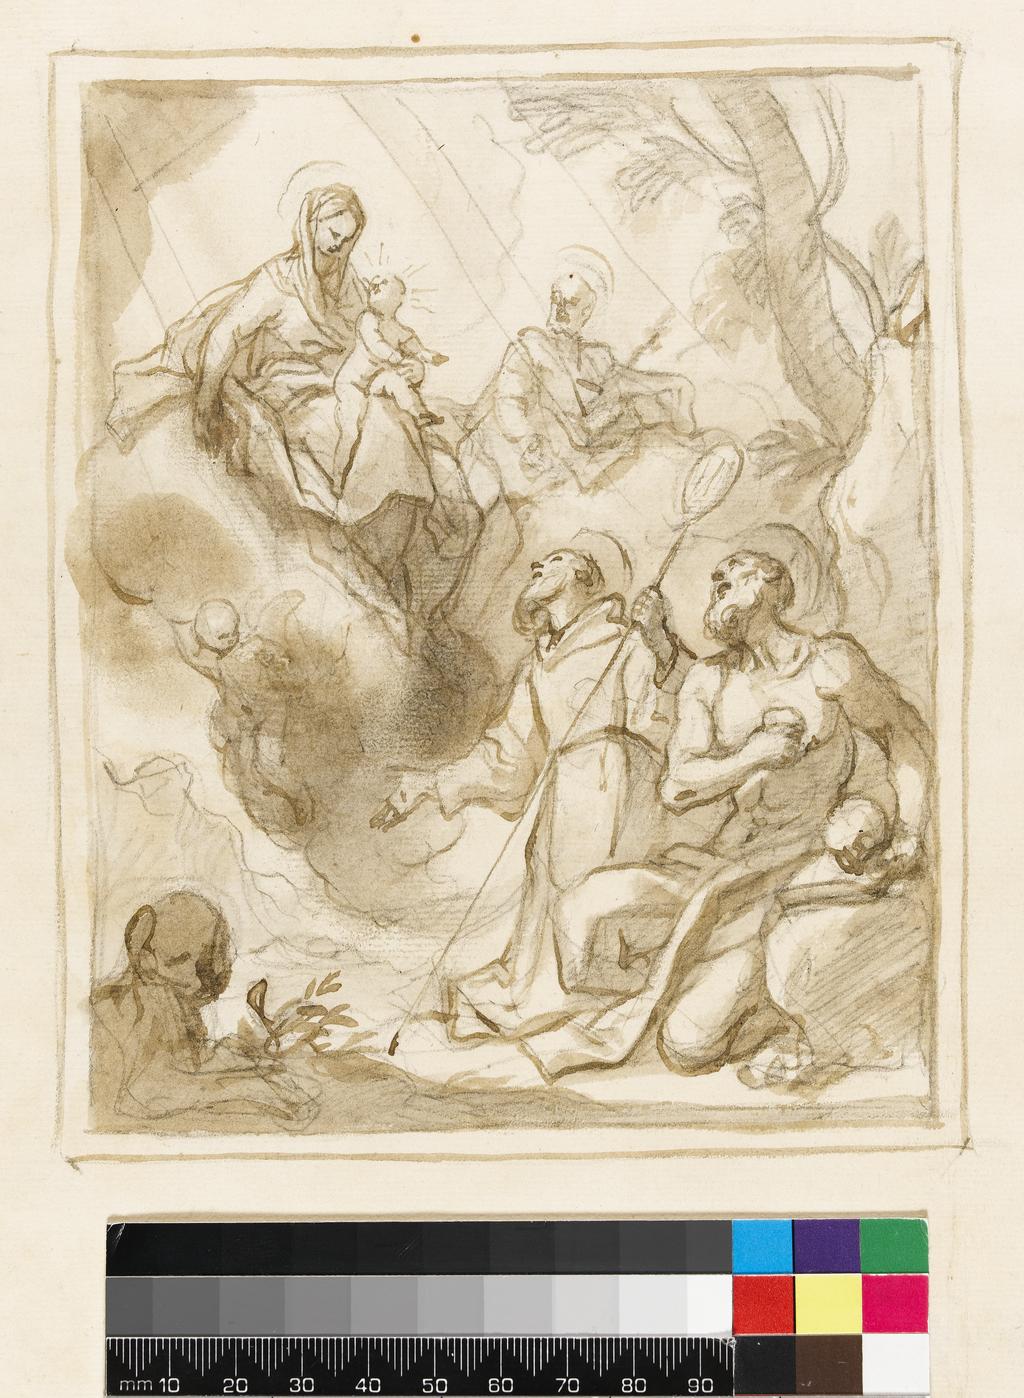 An image of Title/s: The Holy Family adored by St Francis and St Jerome Maker/s: Piola, Domenico I (draughtsman) [ULAN info: Italian artist, 1627-1703]Technique Description: black chalk, pen and brown ink, brown and grey wash, on paper Dimensions: height: 168 mm, width: 140 mm